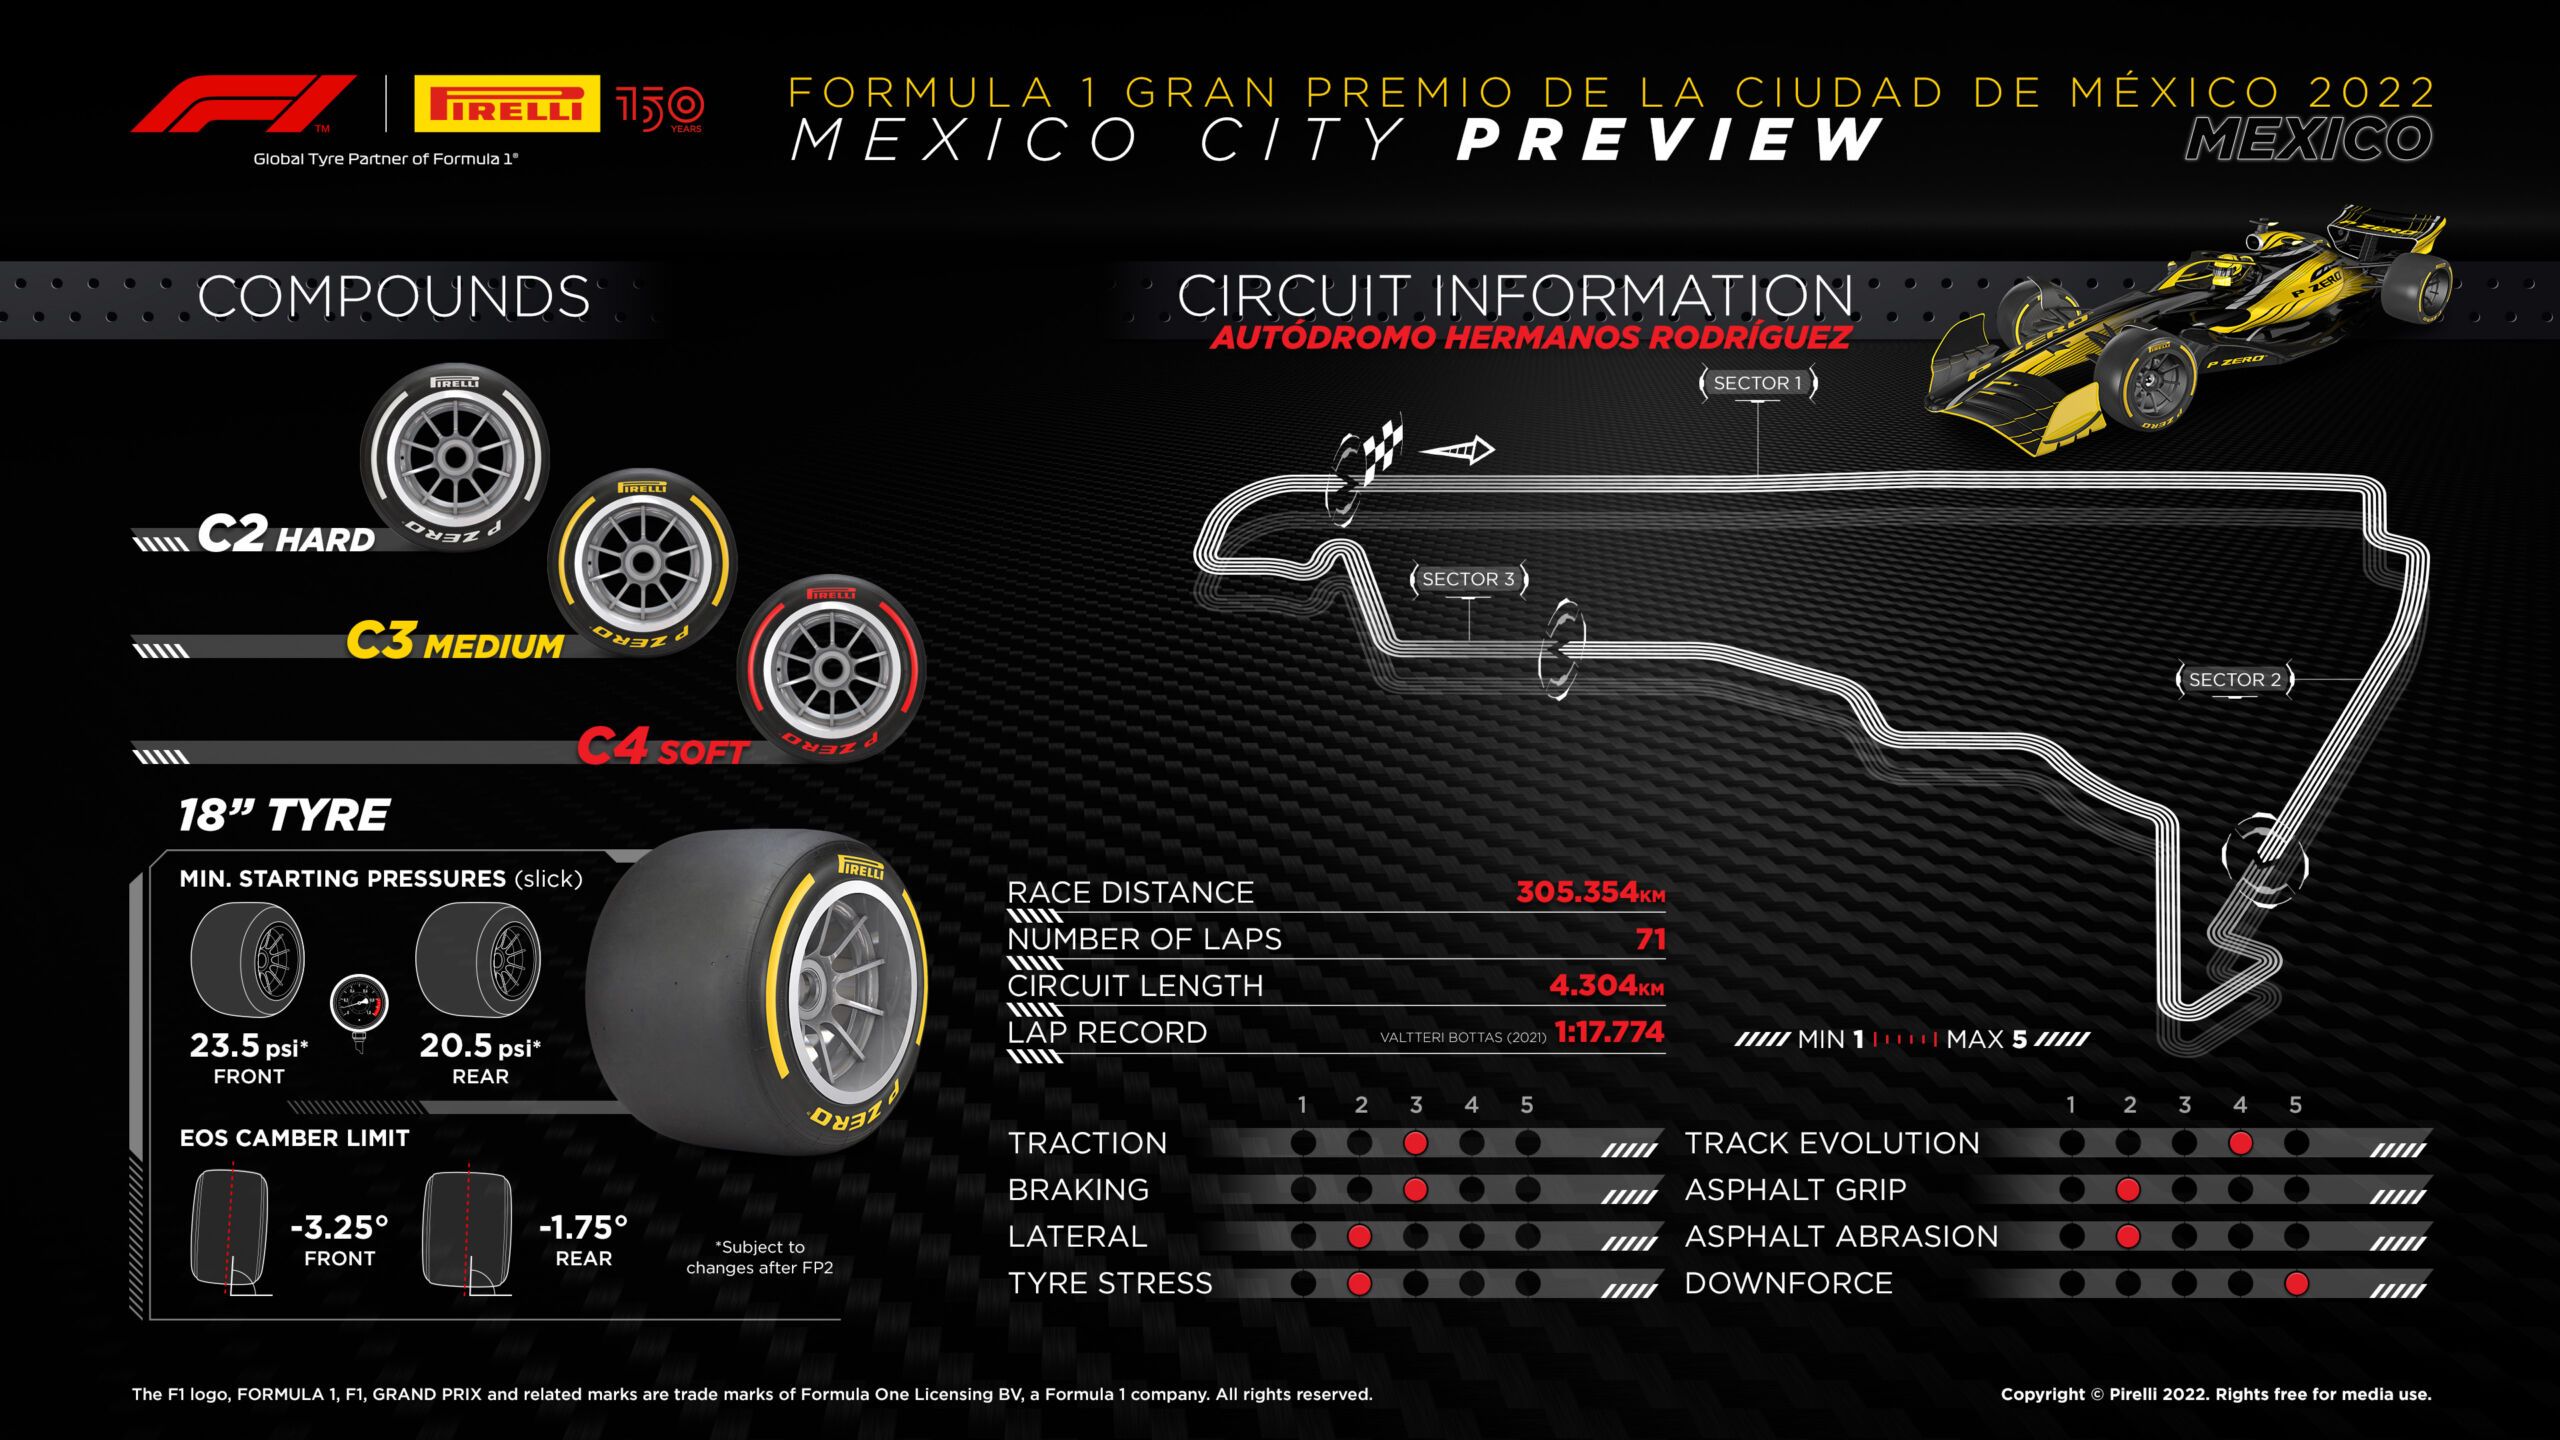 2022 Mexican Grand Prix Tyre Compounds